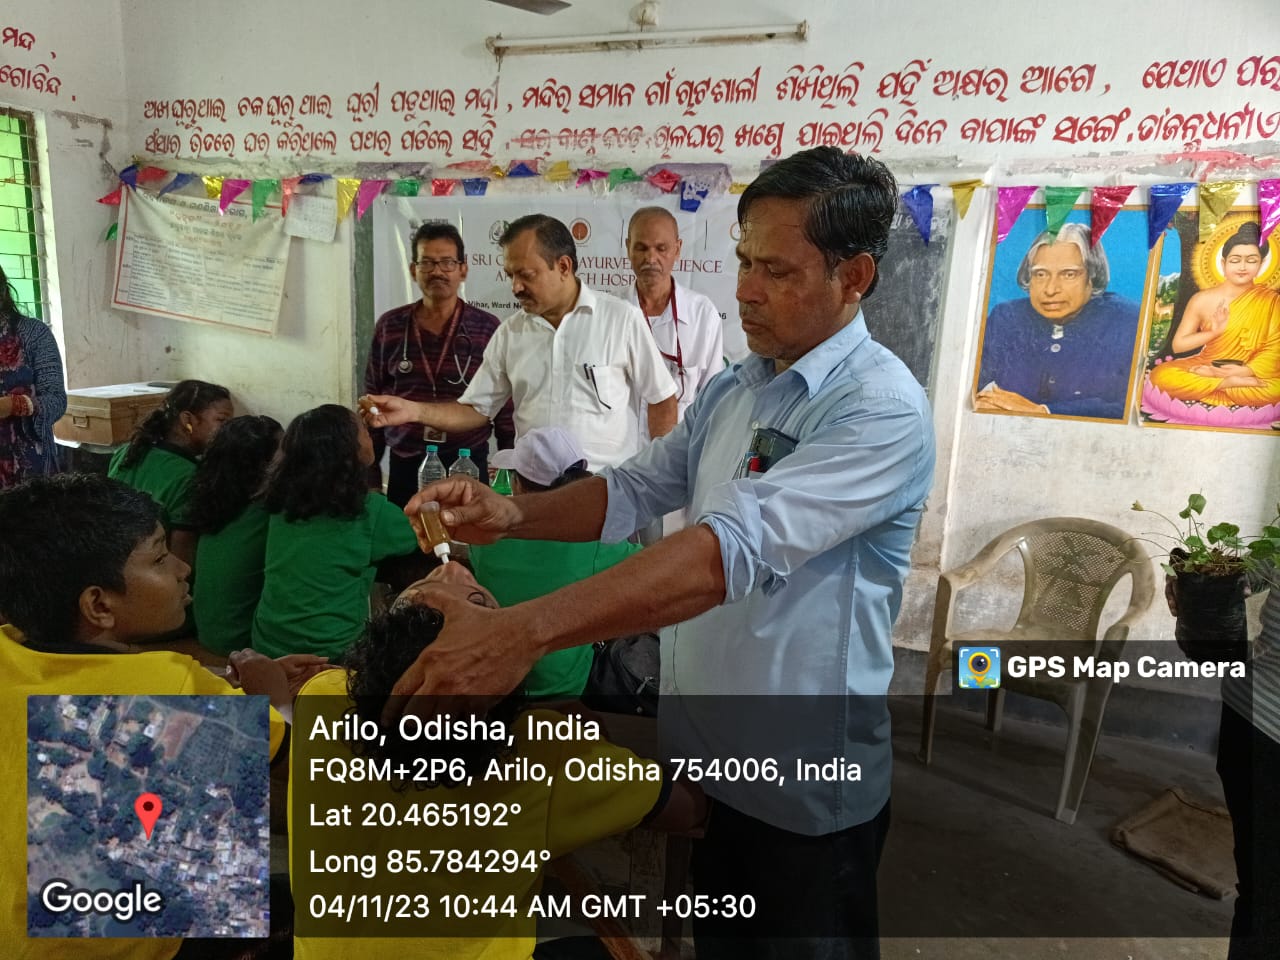 As a part of National Ayurveda Day Celebration. The following events were conducted at Govt Primary School Arilo.